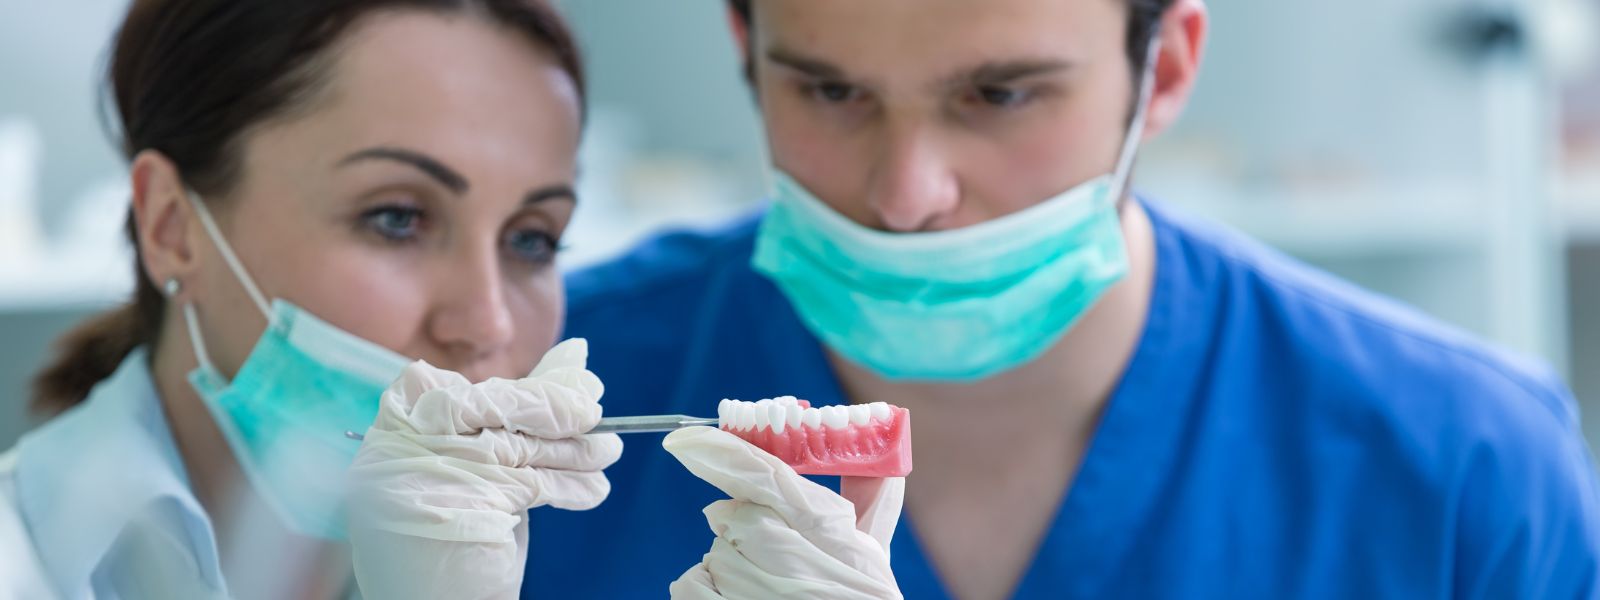 two dentists examine an implant